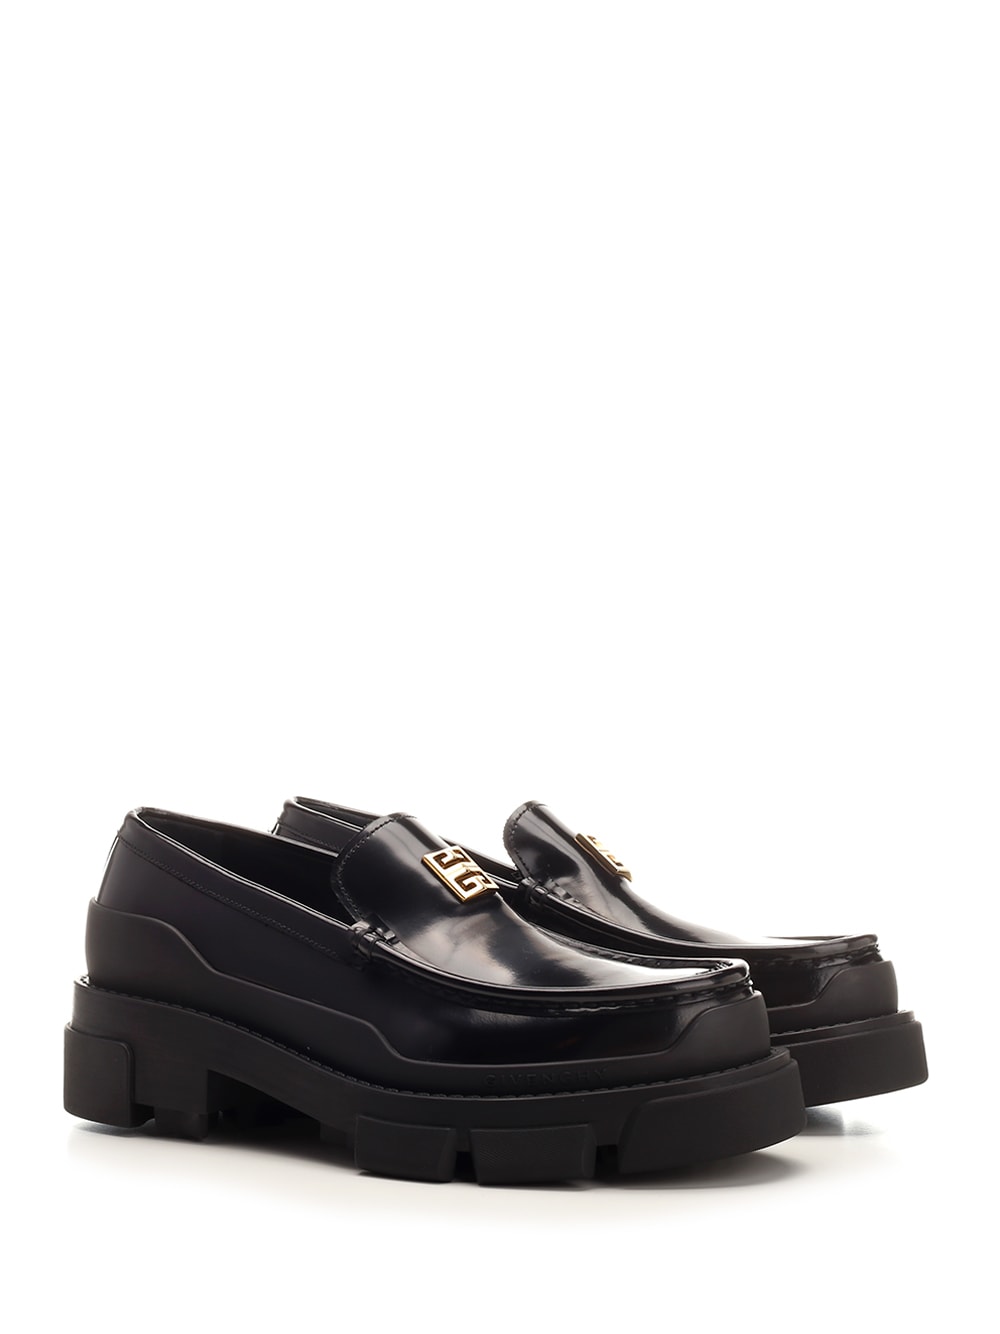 Shop Givenchy Terra Black Loafers